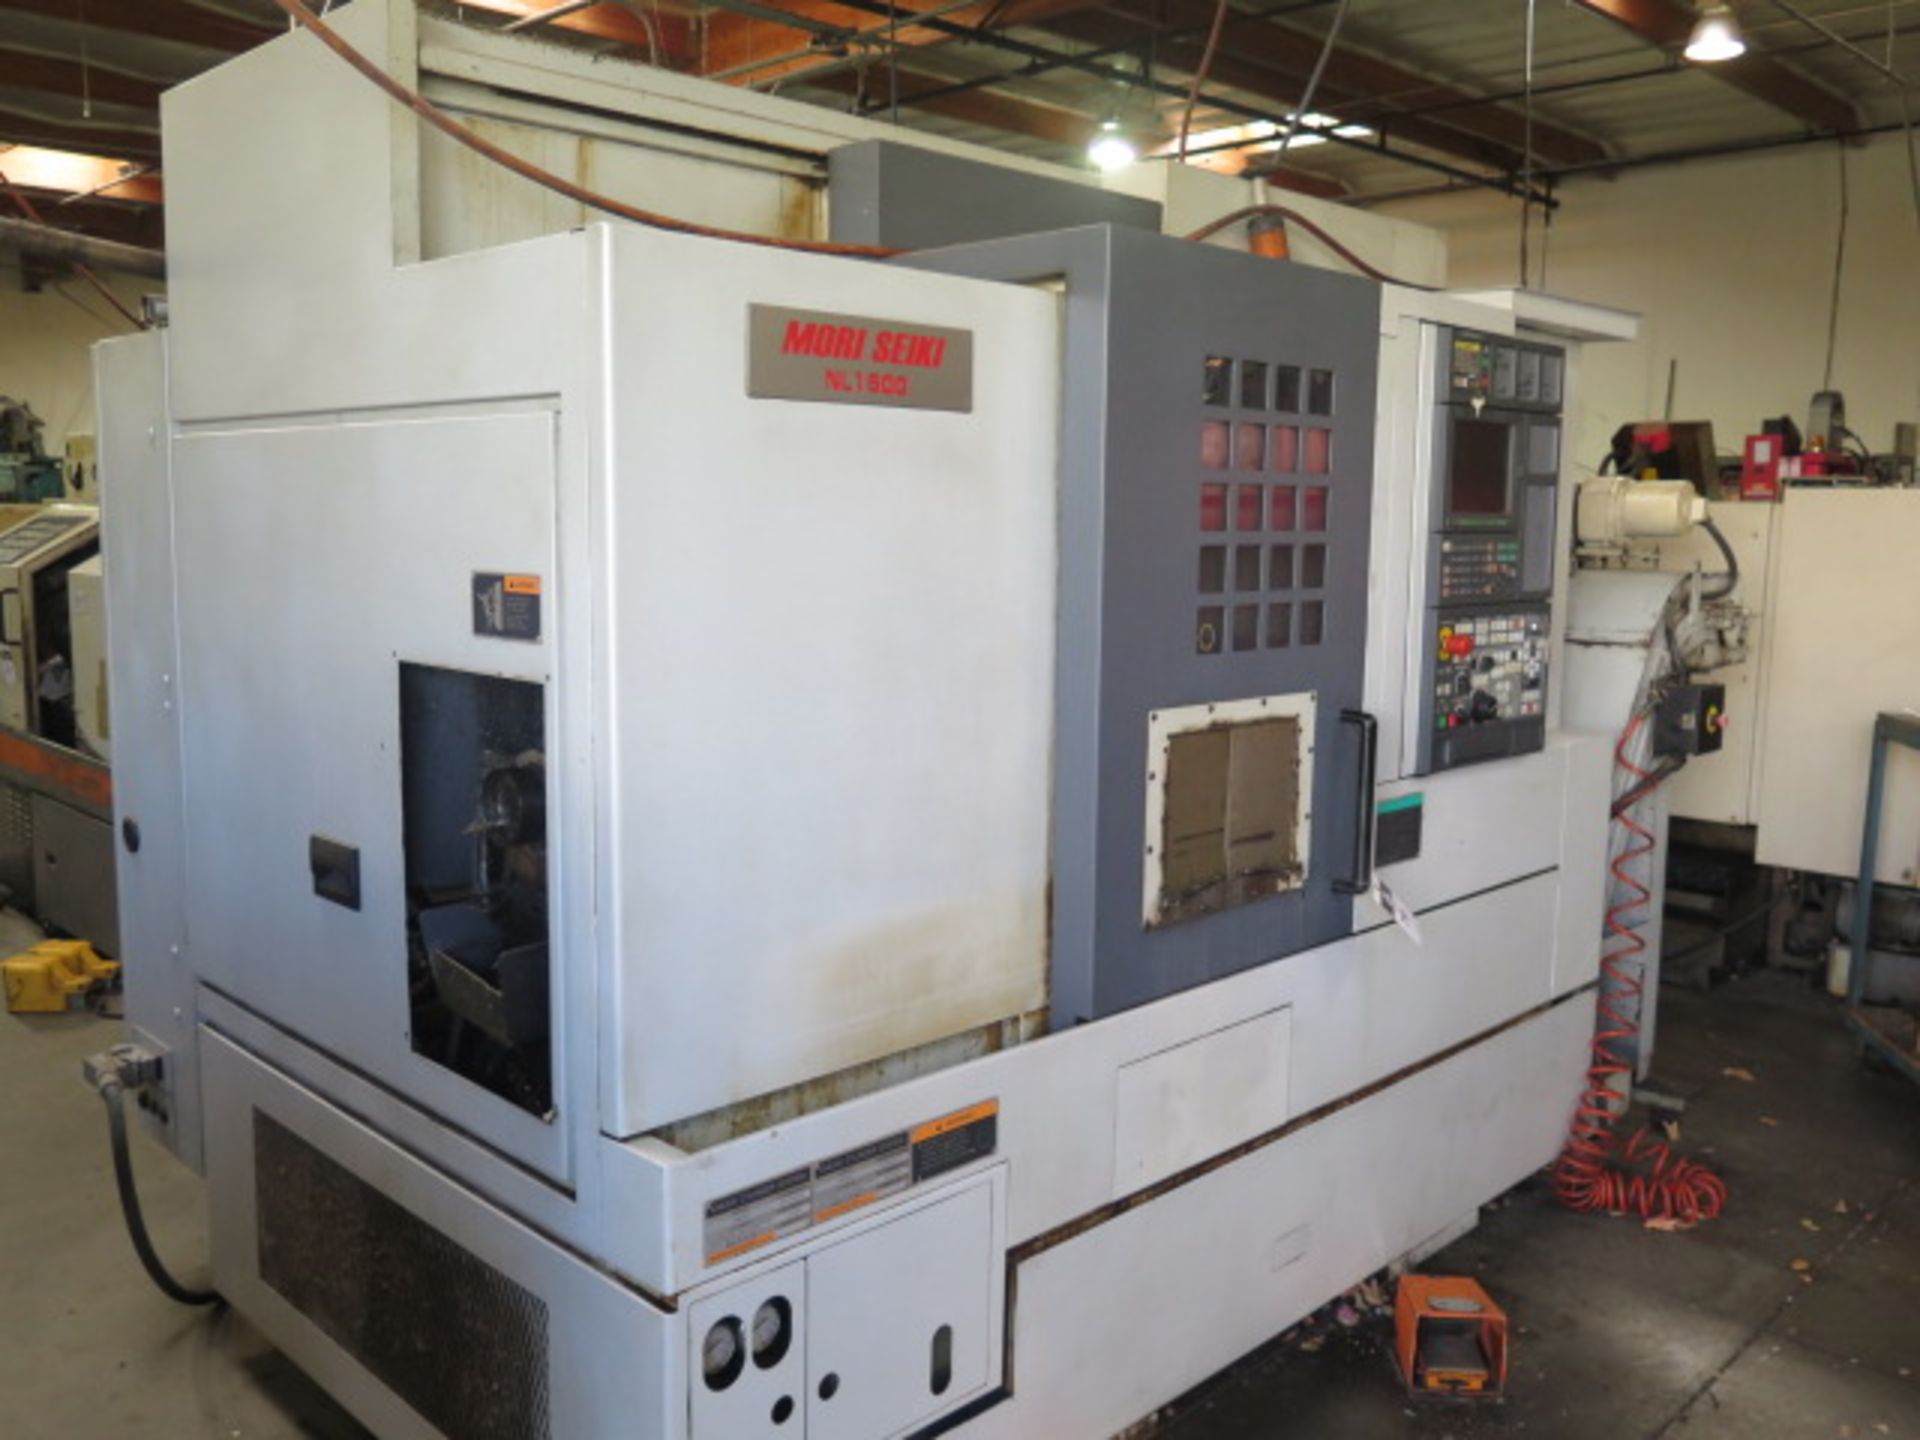 2005 Mori Seiki NL1500 S/500 Twin Spindle CNC Turning Center s/n NL151E01356, SOLD AS IS - Image 2 of 17